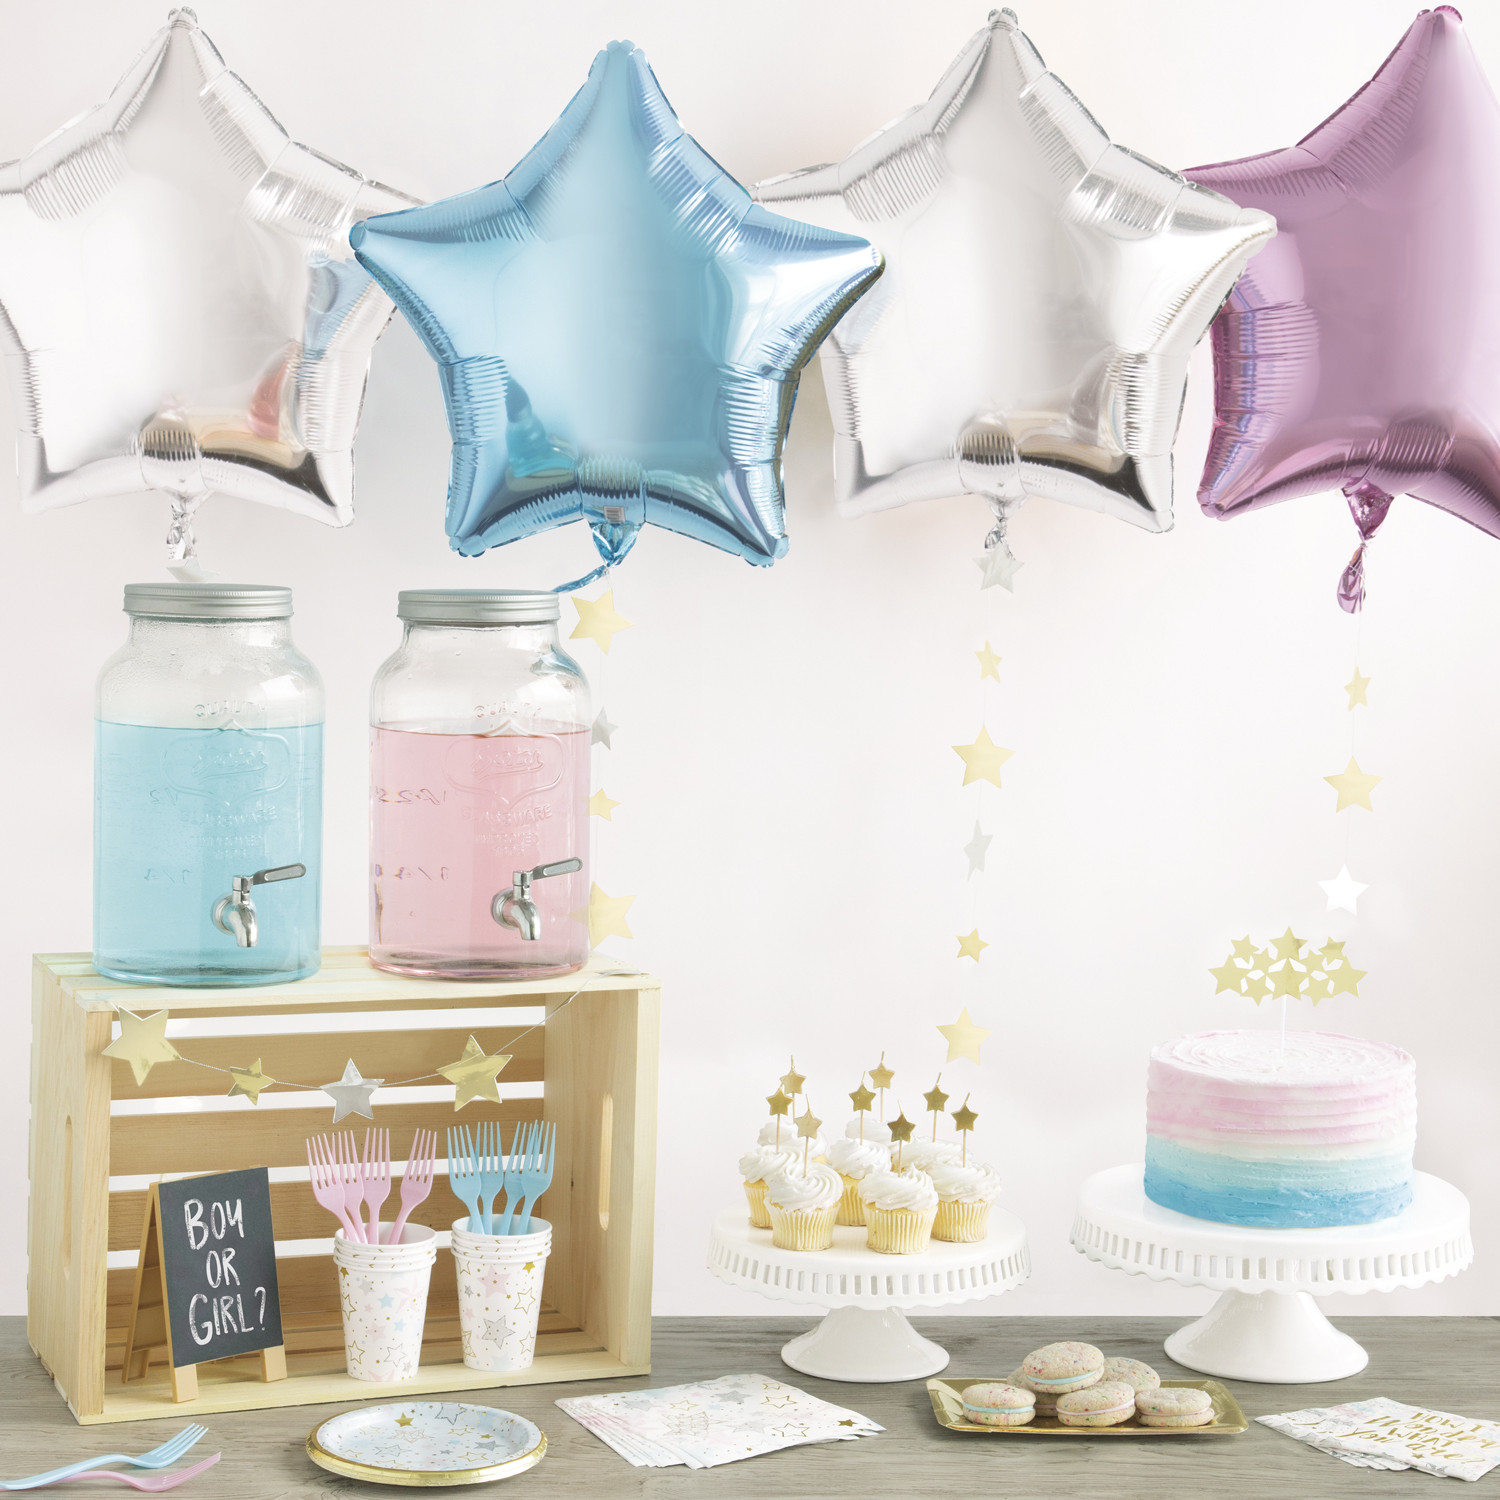 Small Gender Reveal Party Ideas
 Gender Reveal Party Ideas